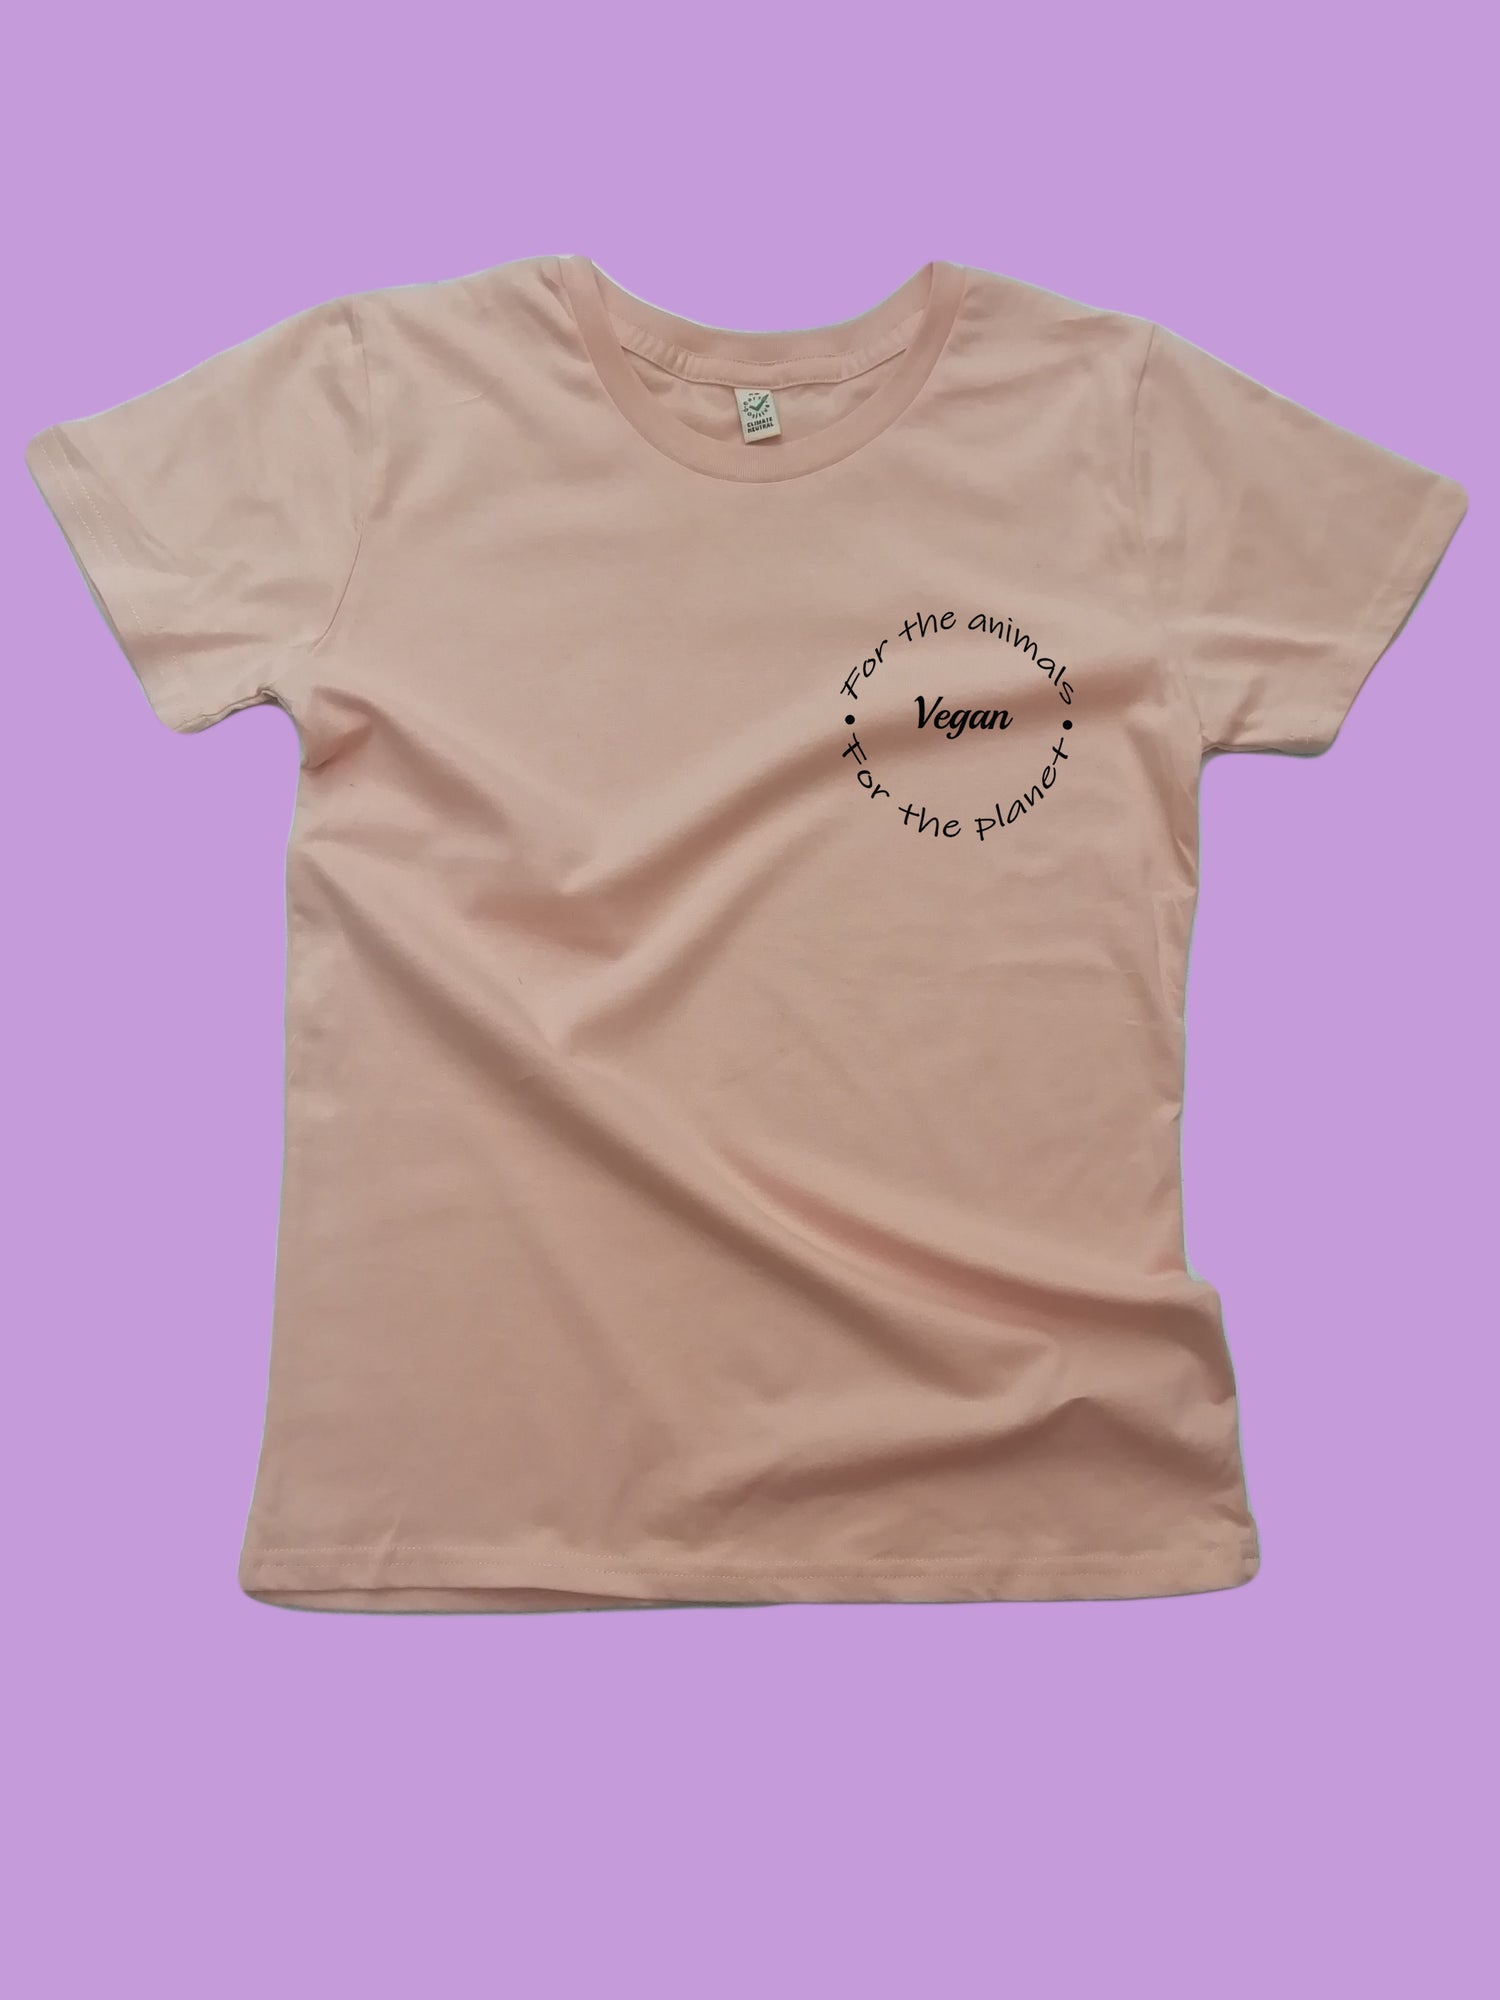 Vegan for the animals and the planet Organic T Shirt